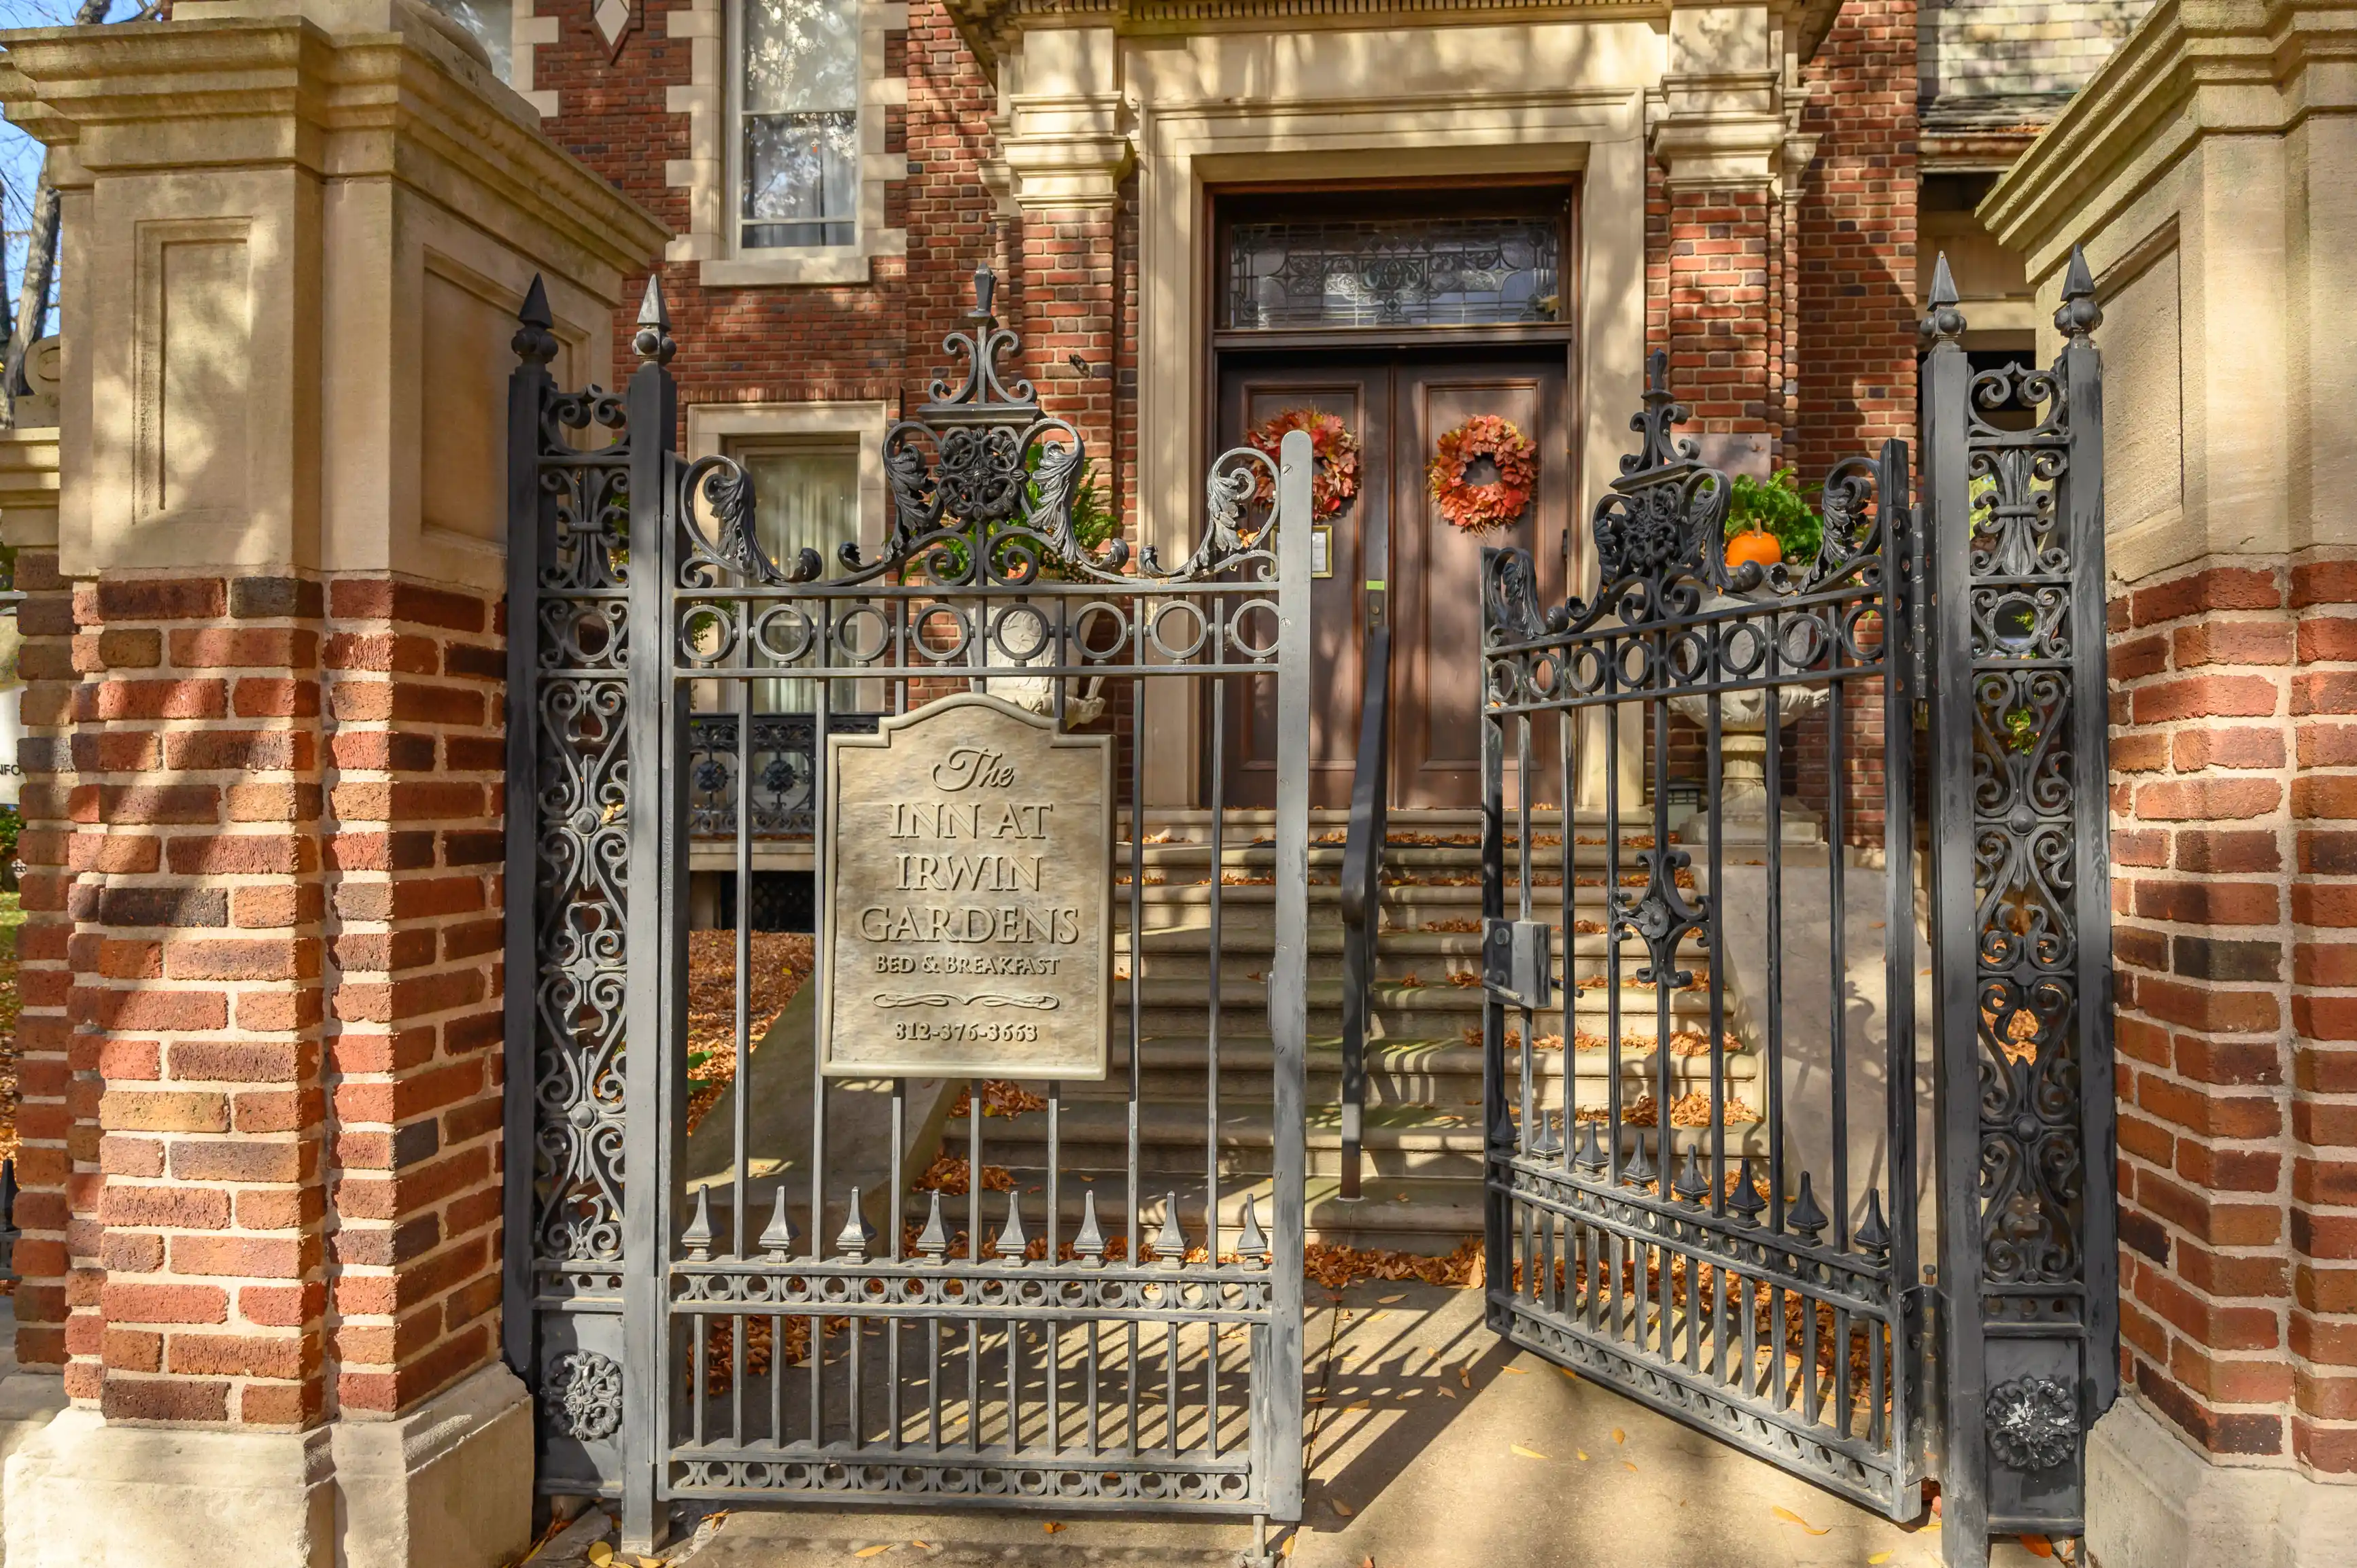 Ornate wrought iron gate open inwards towards the entrance of "The Inn at Irwin Gardens Bed & Breakfast" with decorative wreaths on doors and a signboard with contact information on a sunny day.